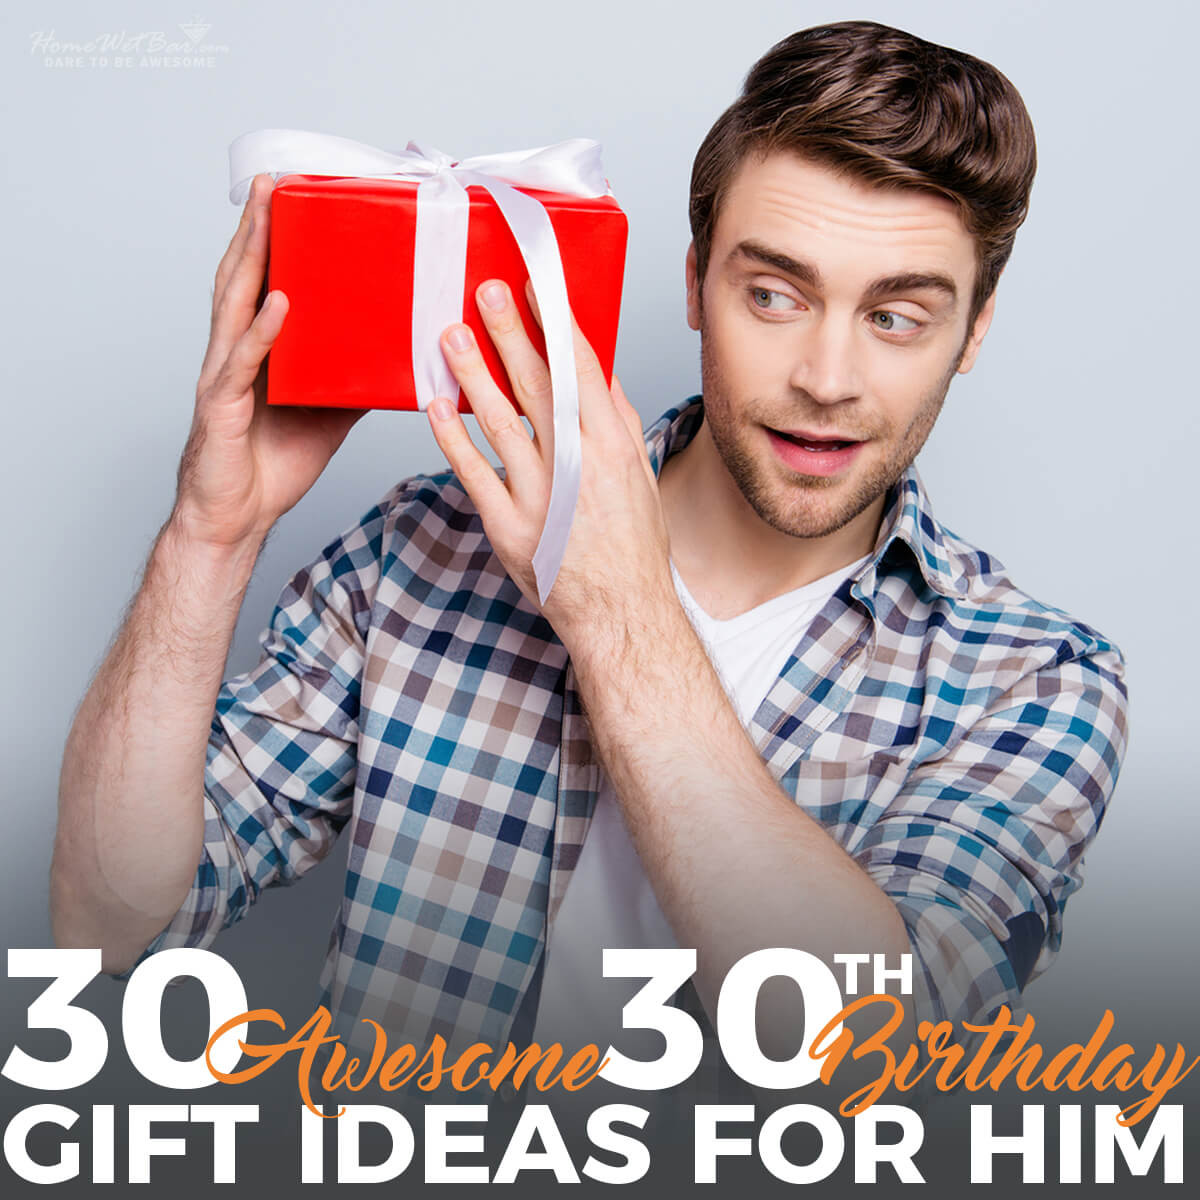 Fun Birthday Gifts For Him
 30 Awesome 30th Birthday Gift Ideas for Him